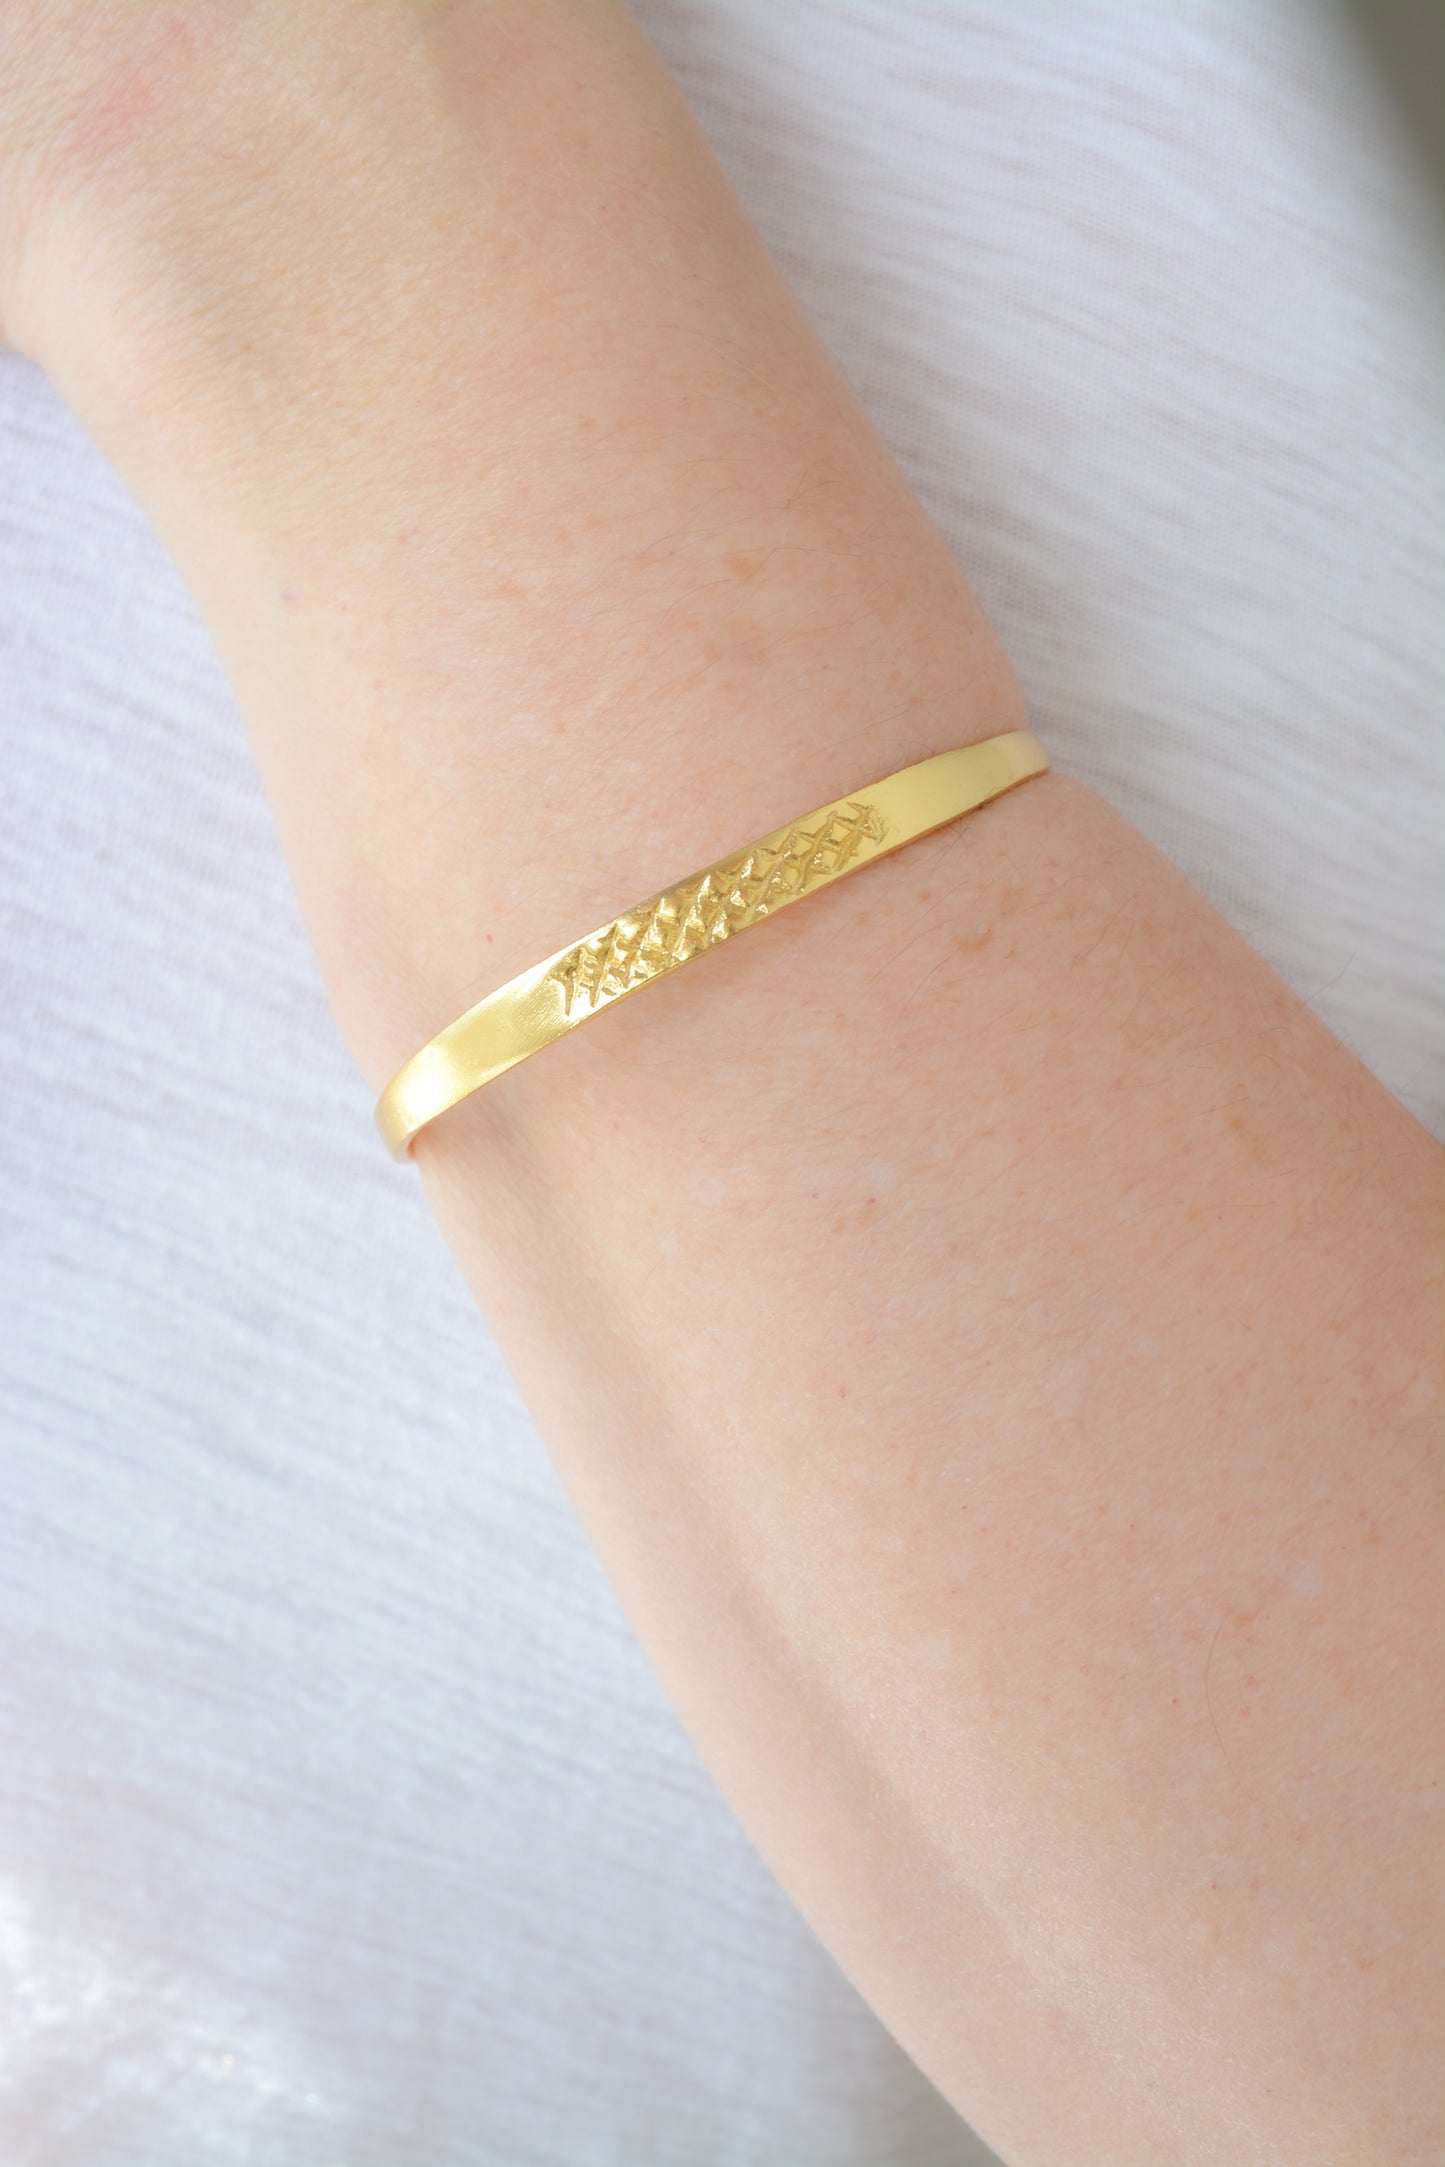 Handmade gold plated engraved cuff